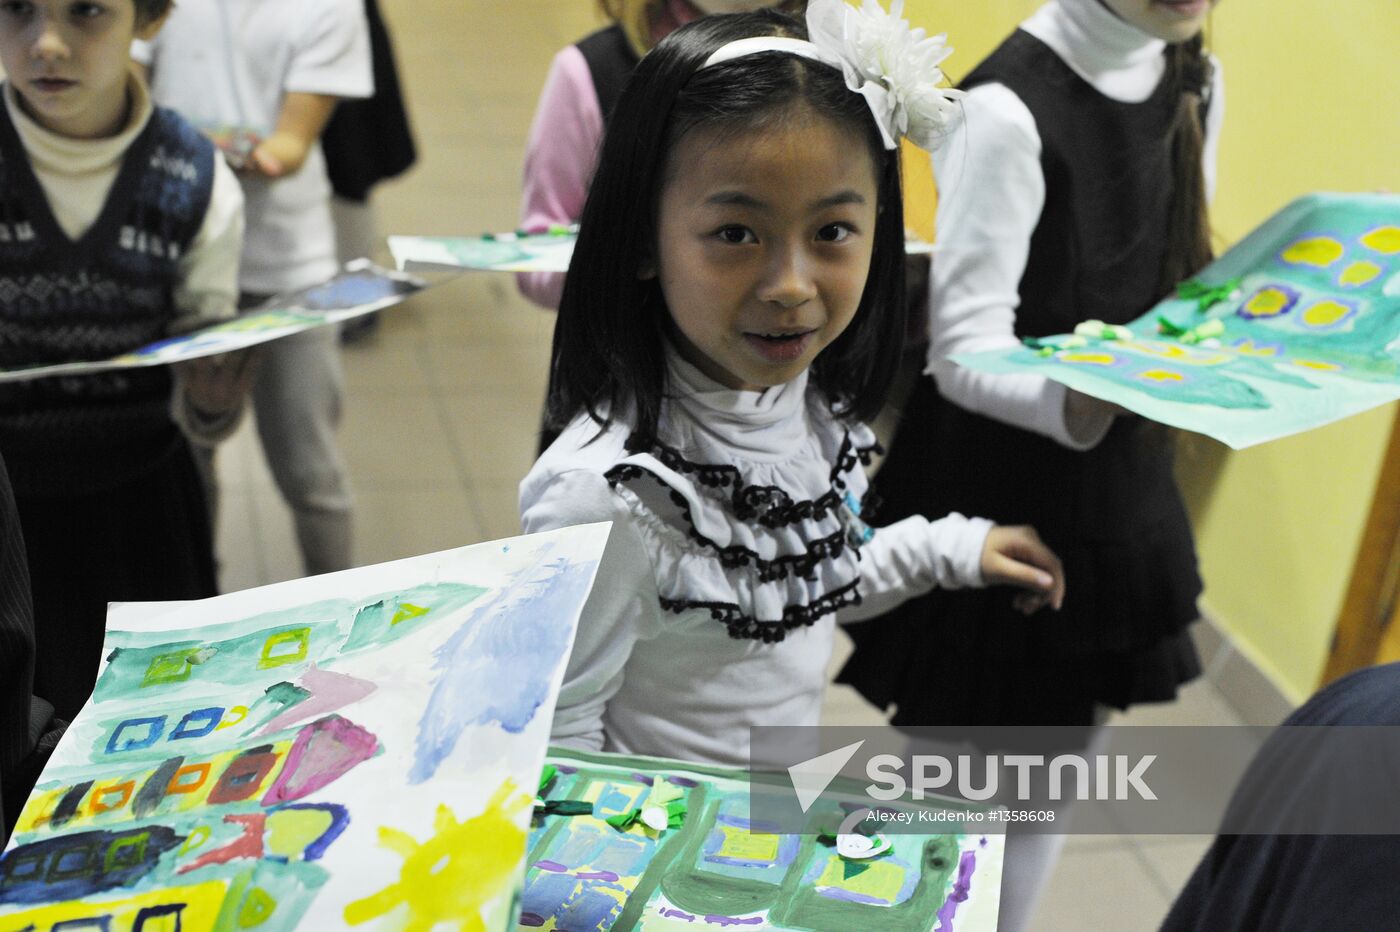 Migrants' children get education in Moscow